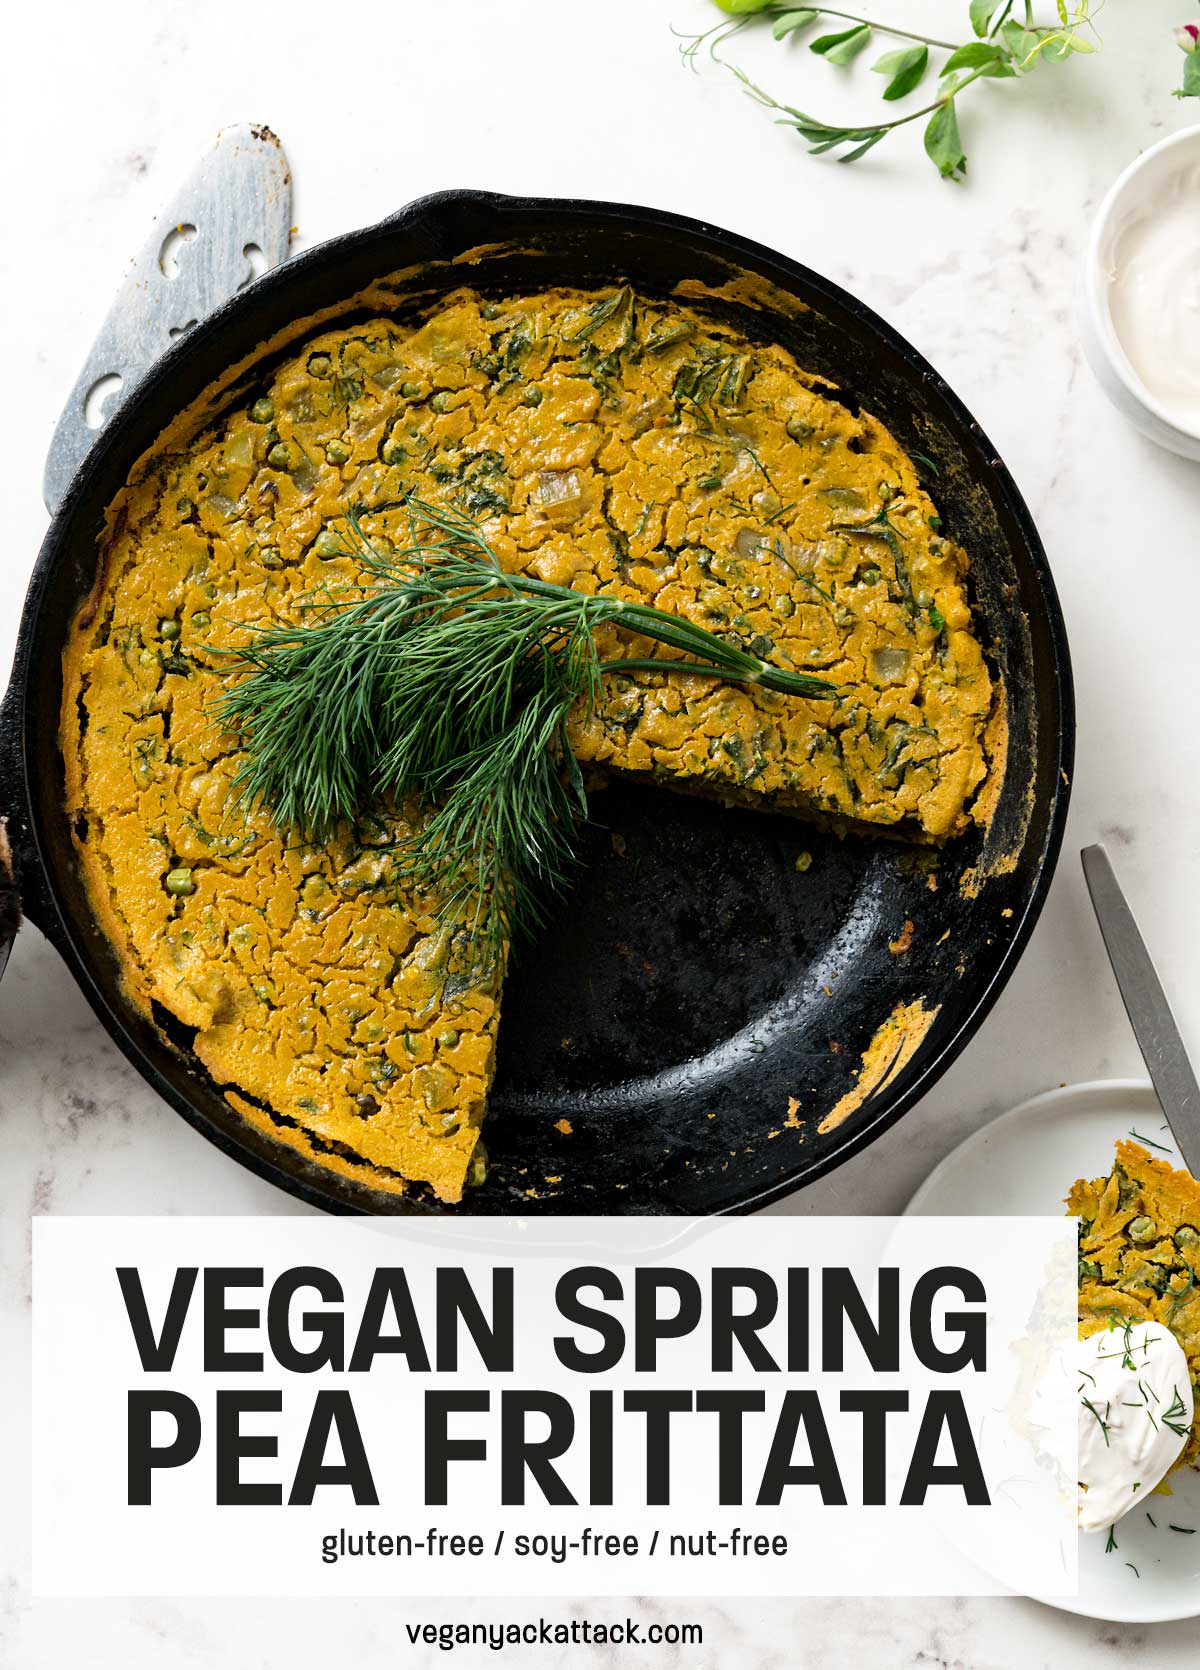 cast iron skillet with a partially sliced frittata with text overlay "vegan spring pea frittata"